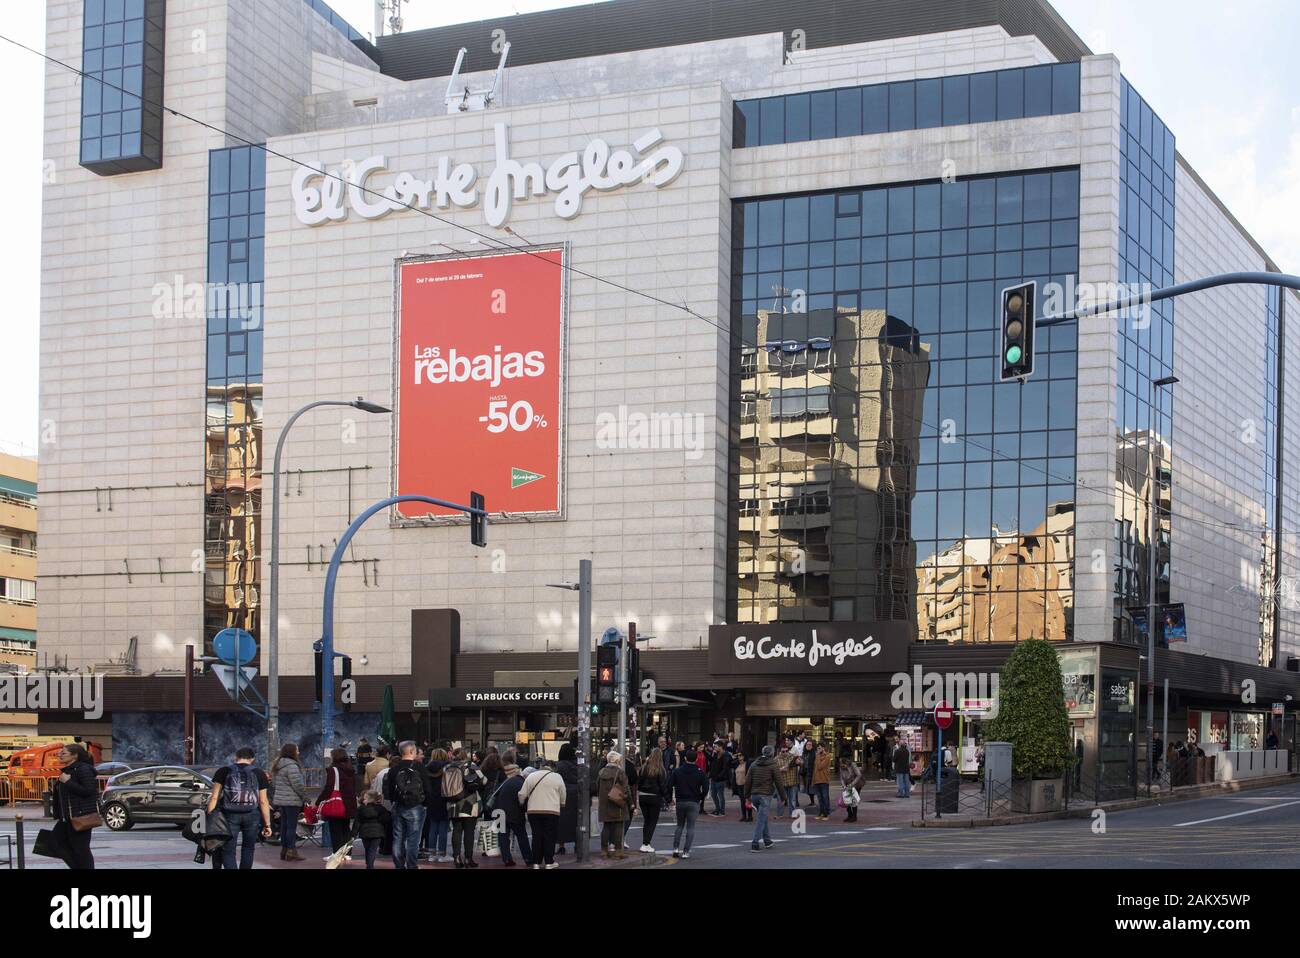 January 9, 2020, Spain: Spanish biggest department store El Corte InglÃ©s and logo seen in Spain. (Credit Image: © Budrul Chukrut/SOPA Images via ZUMA Wire) Stock Photo